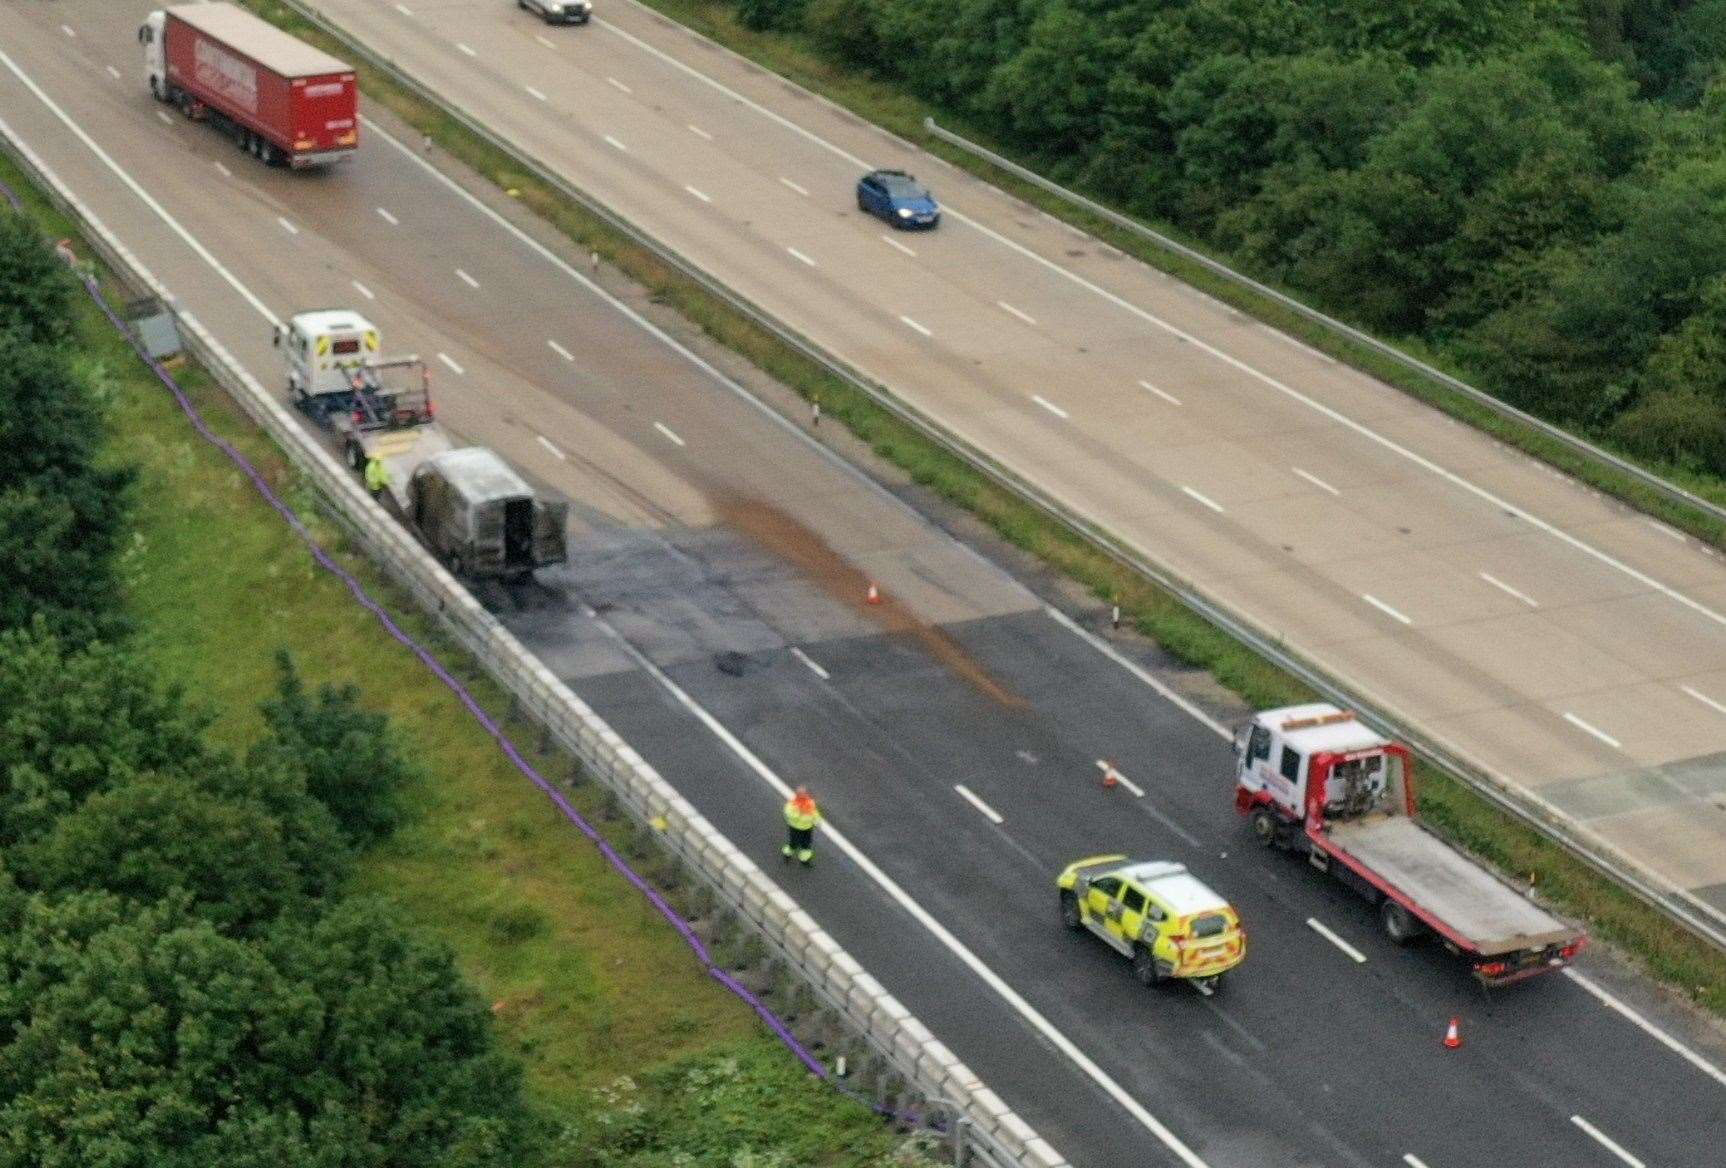 A van fire closed a section of the M20 Picture: UKNIP